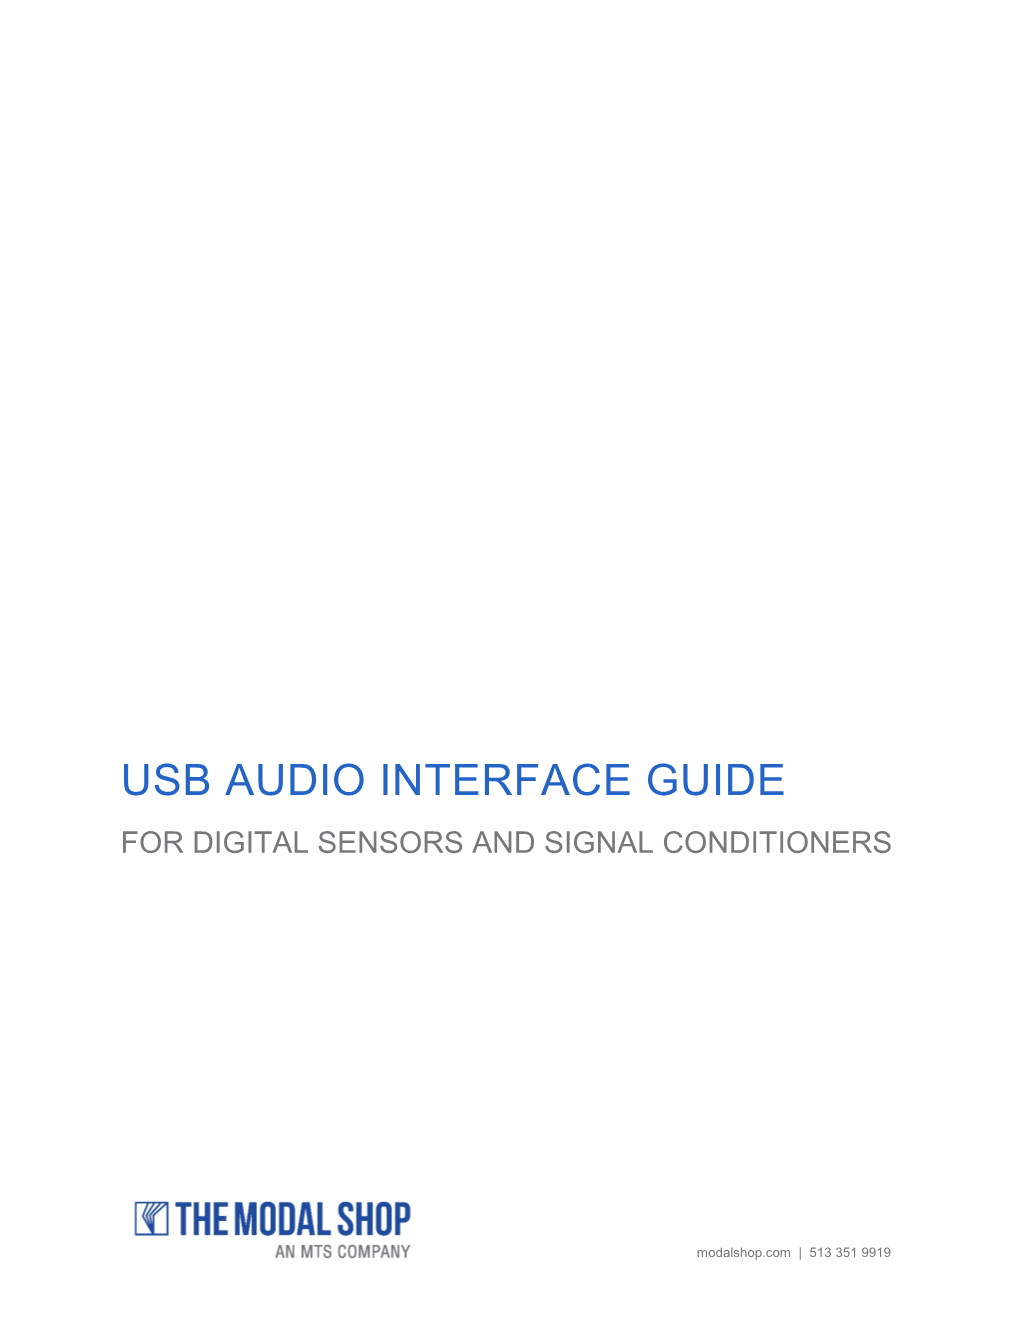 Usb Audio Interface Guide for Digital Sensors and Signal Conditioners